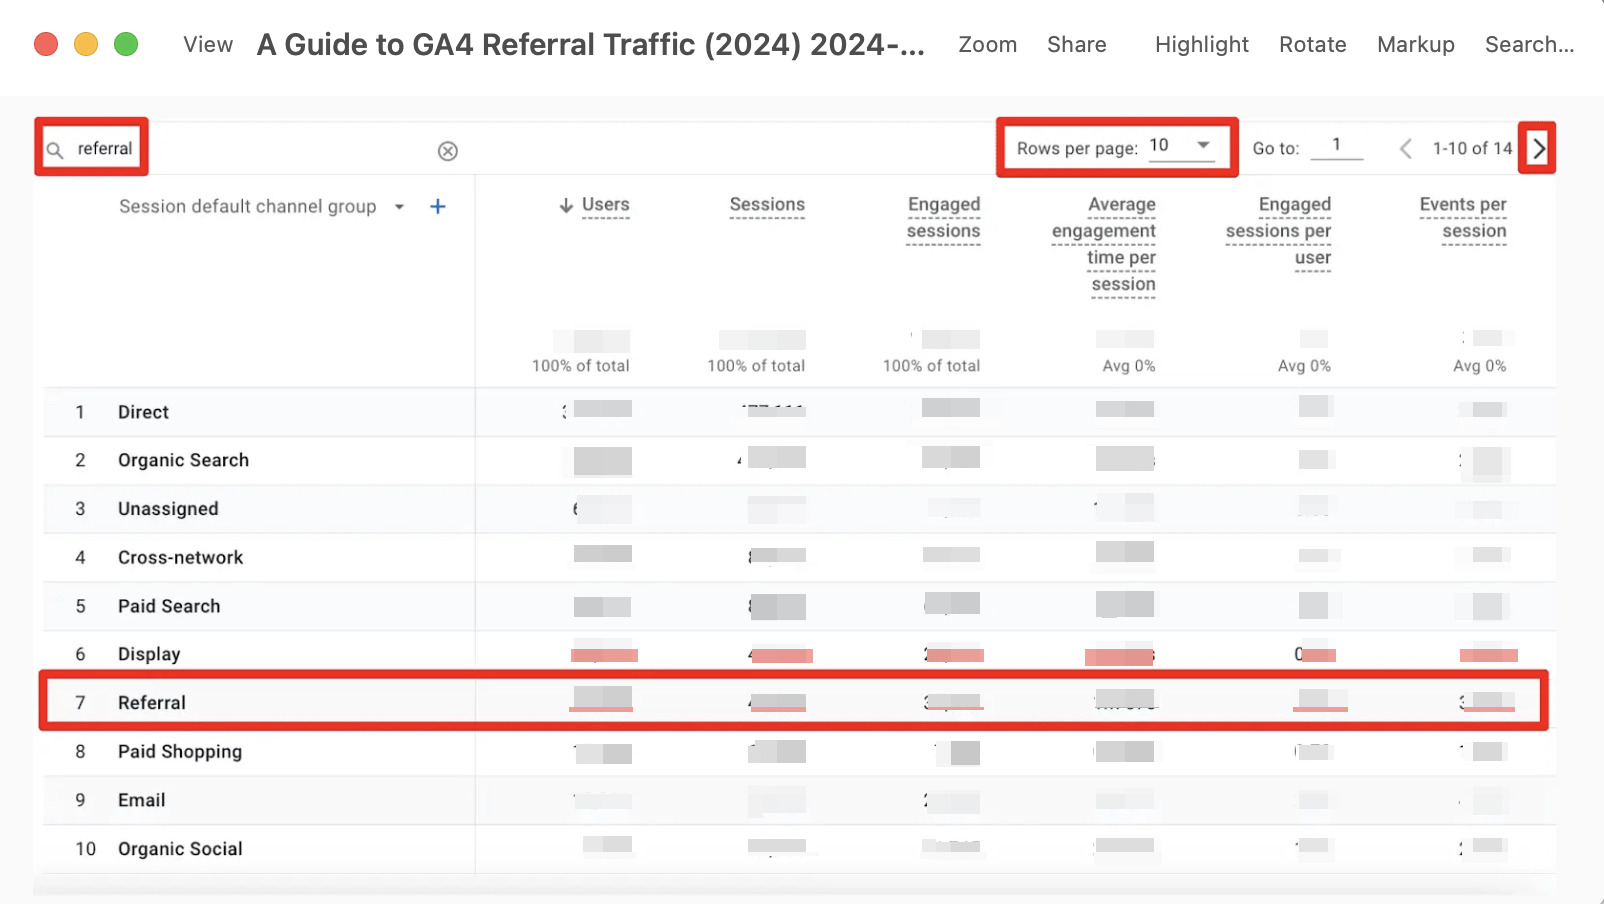 Filtering the table for ‘referral’ entries will reveal the originating websites.